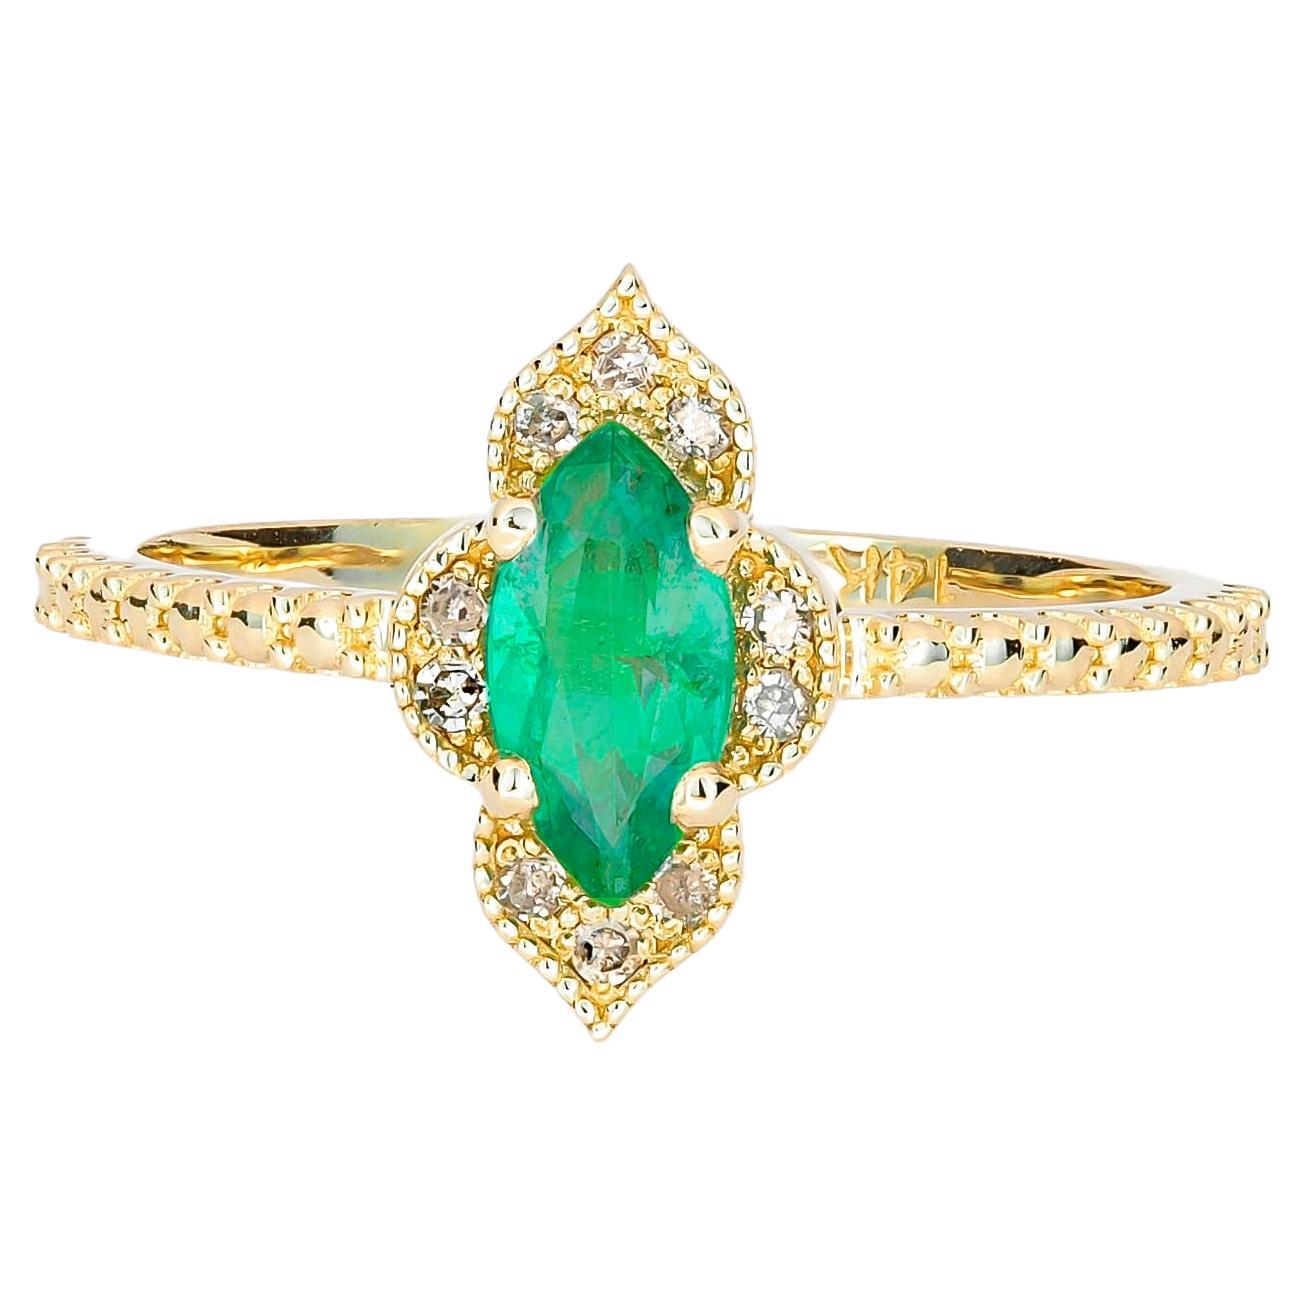 For Sale:  14k Gold Ring with Marquise Cut Emerald and Diamonds